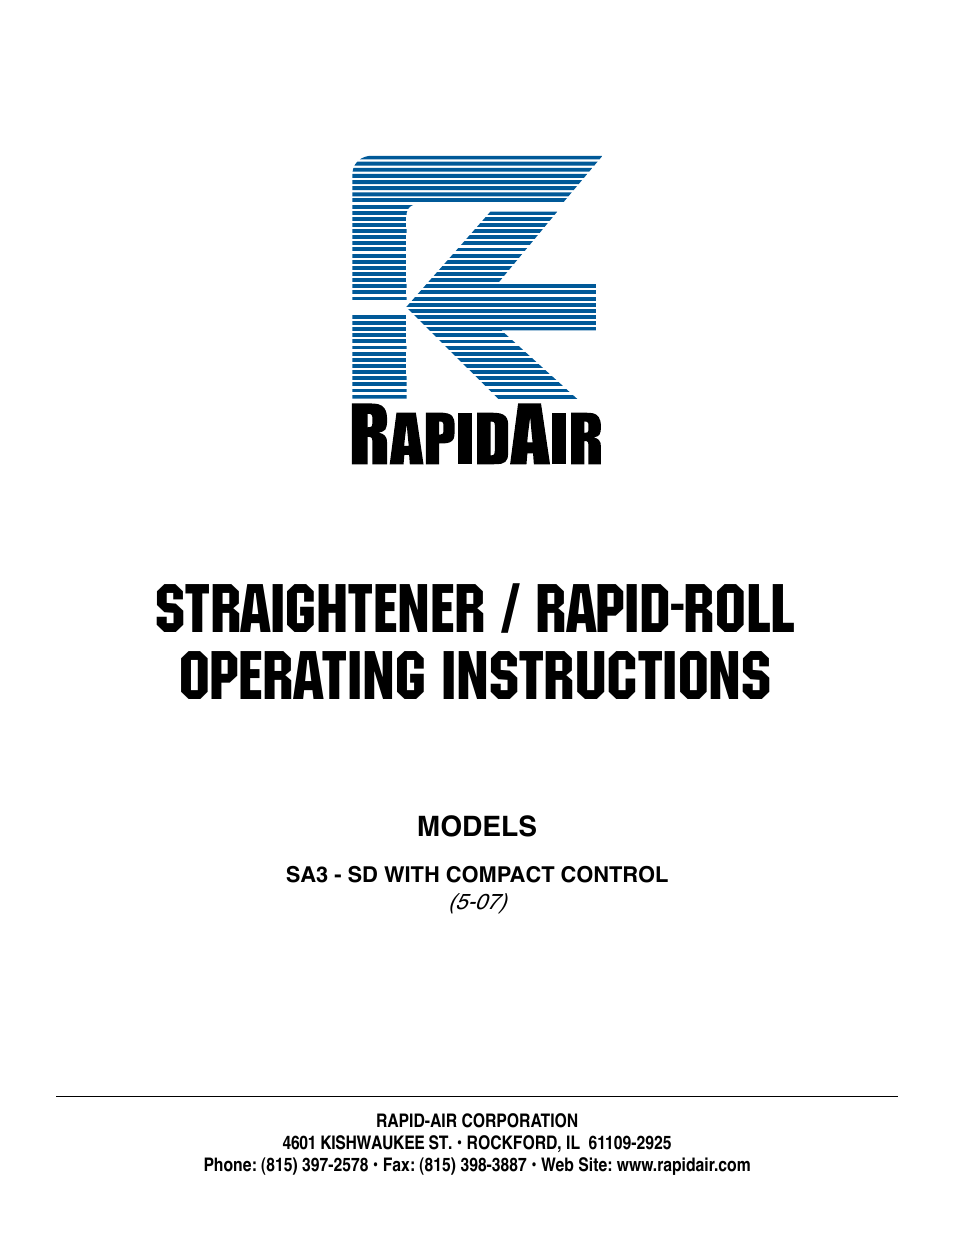 STRAIGHTENER / RAPID-ROLL: SA3 - SD with compact control